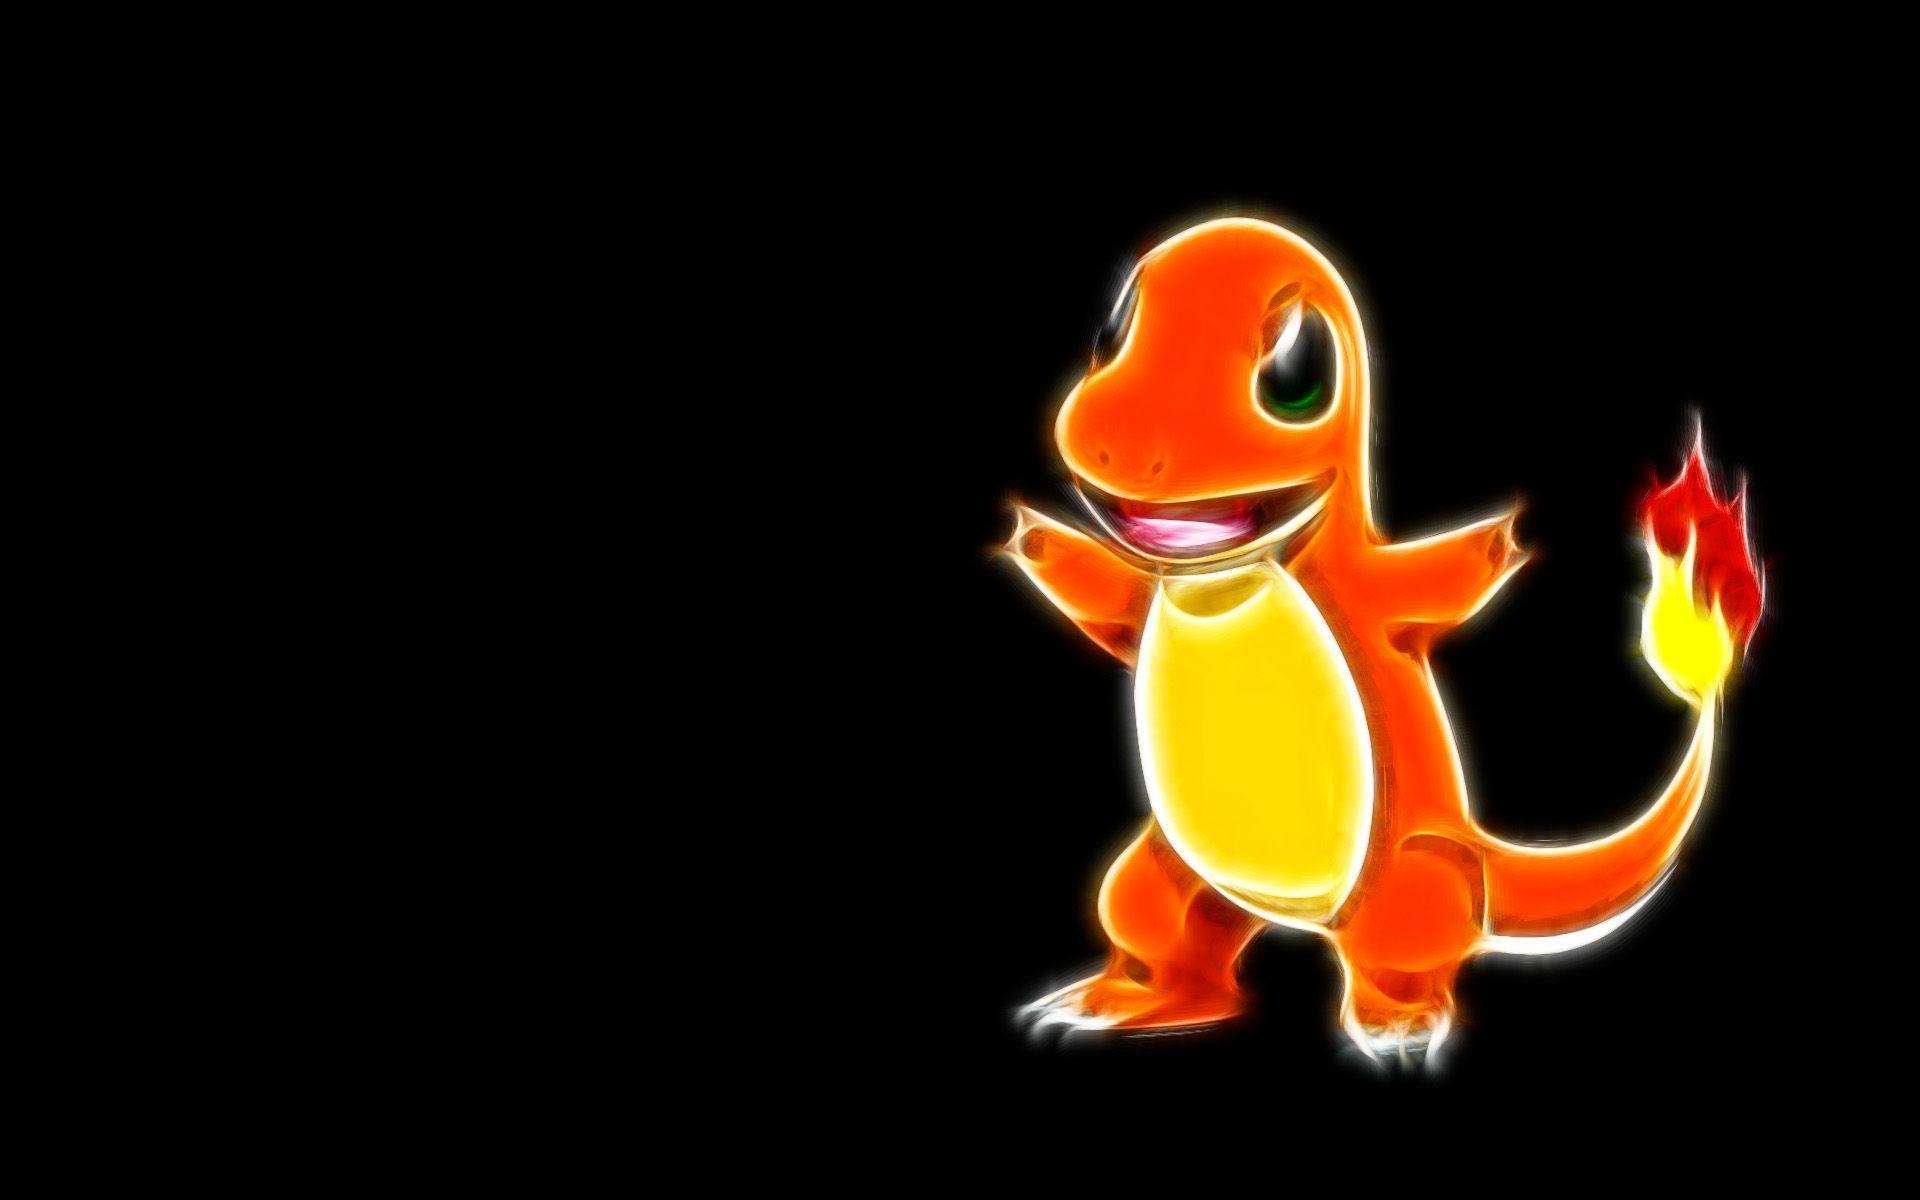 charmander hd wallpapers wallpaper cave on charmander hd wallpapers